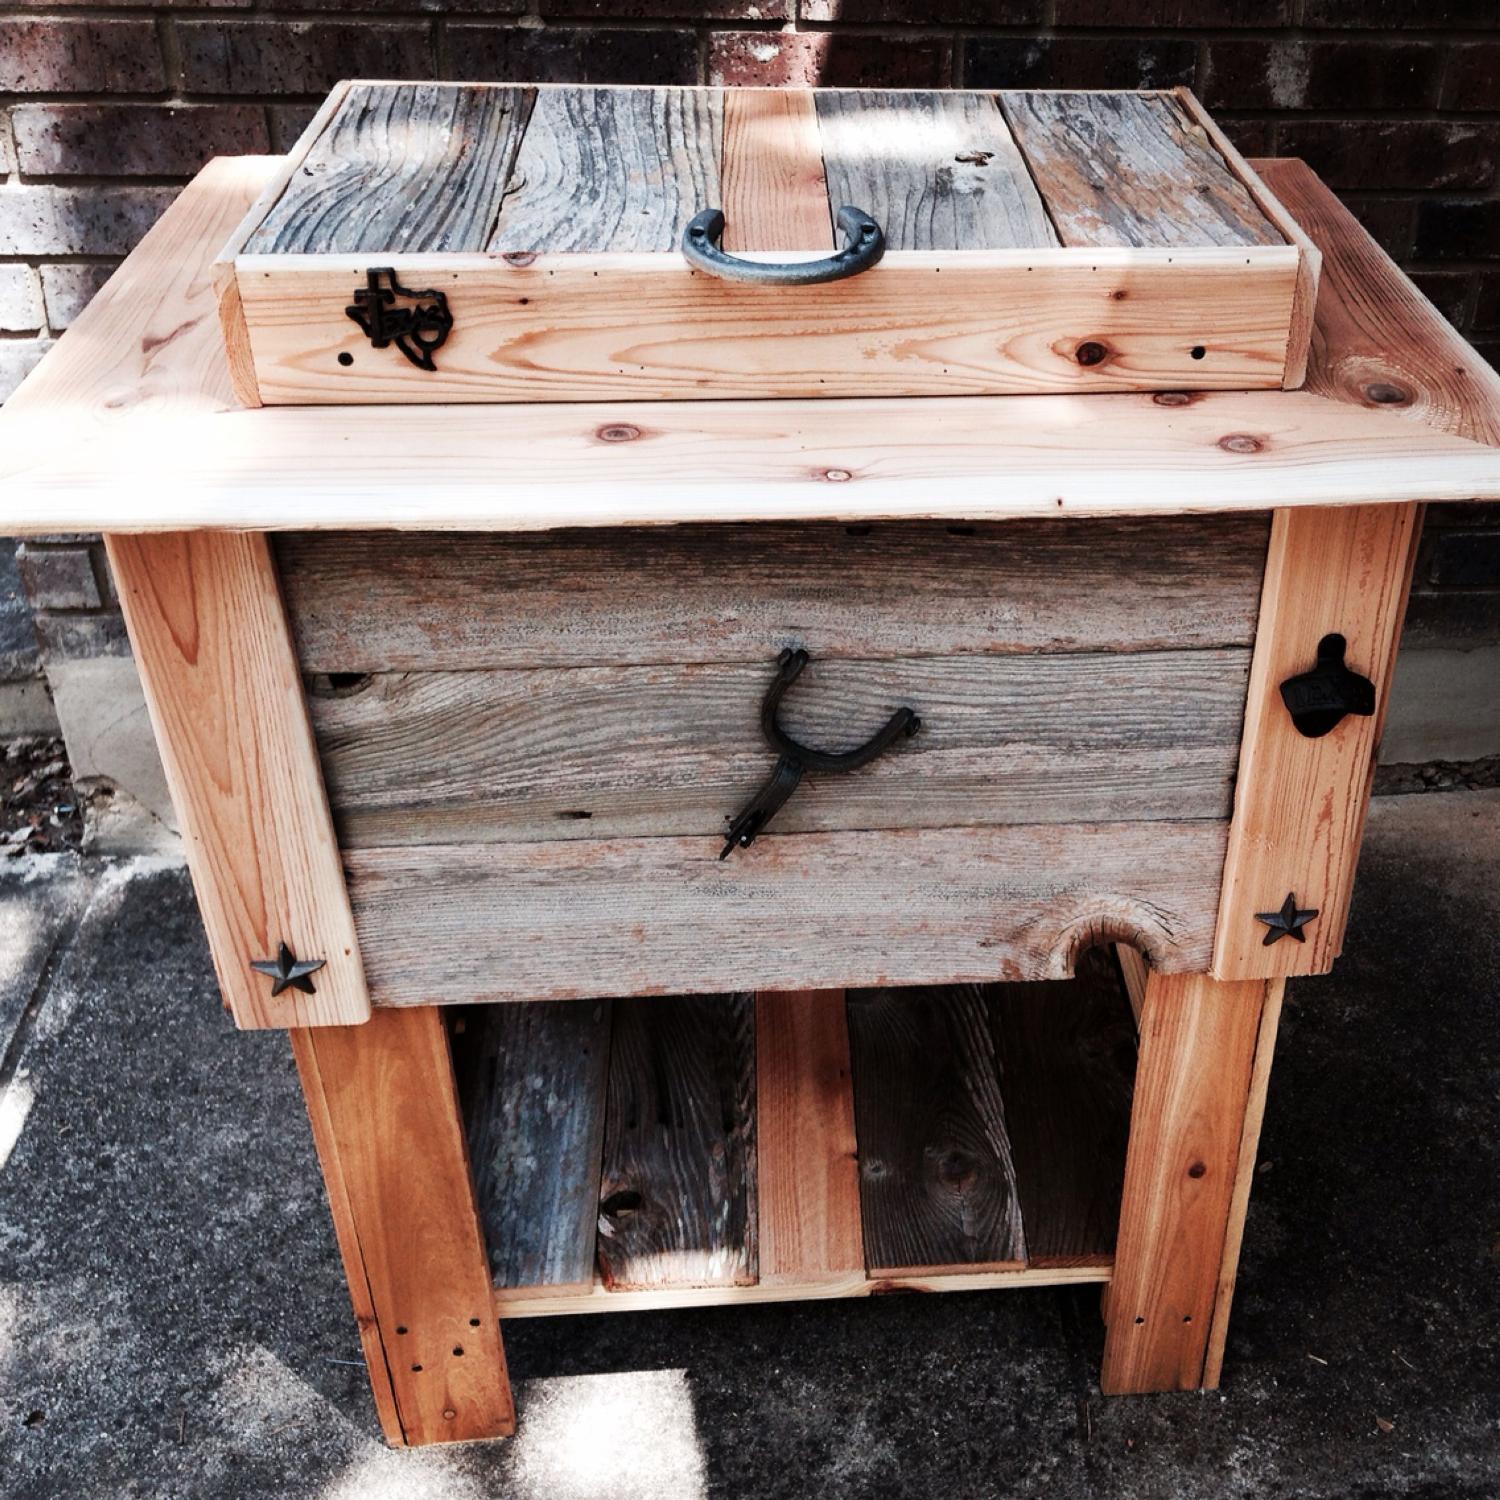 Best Cowboy Cooler, Rustic Cooler, Ice Chest for sale in Braun Road ...